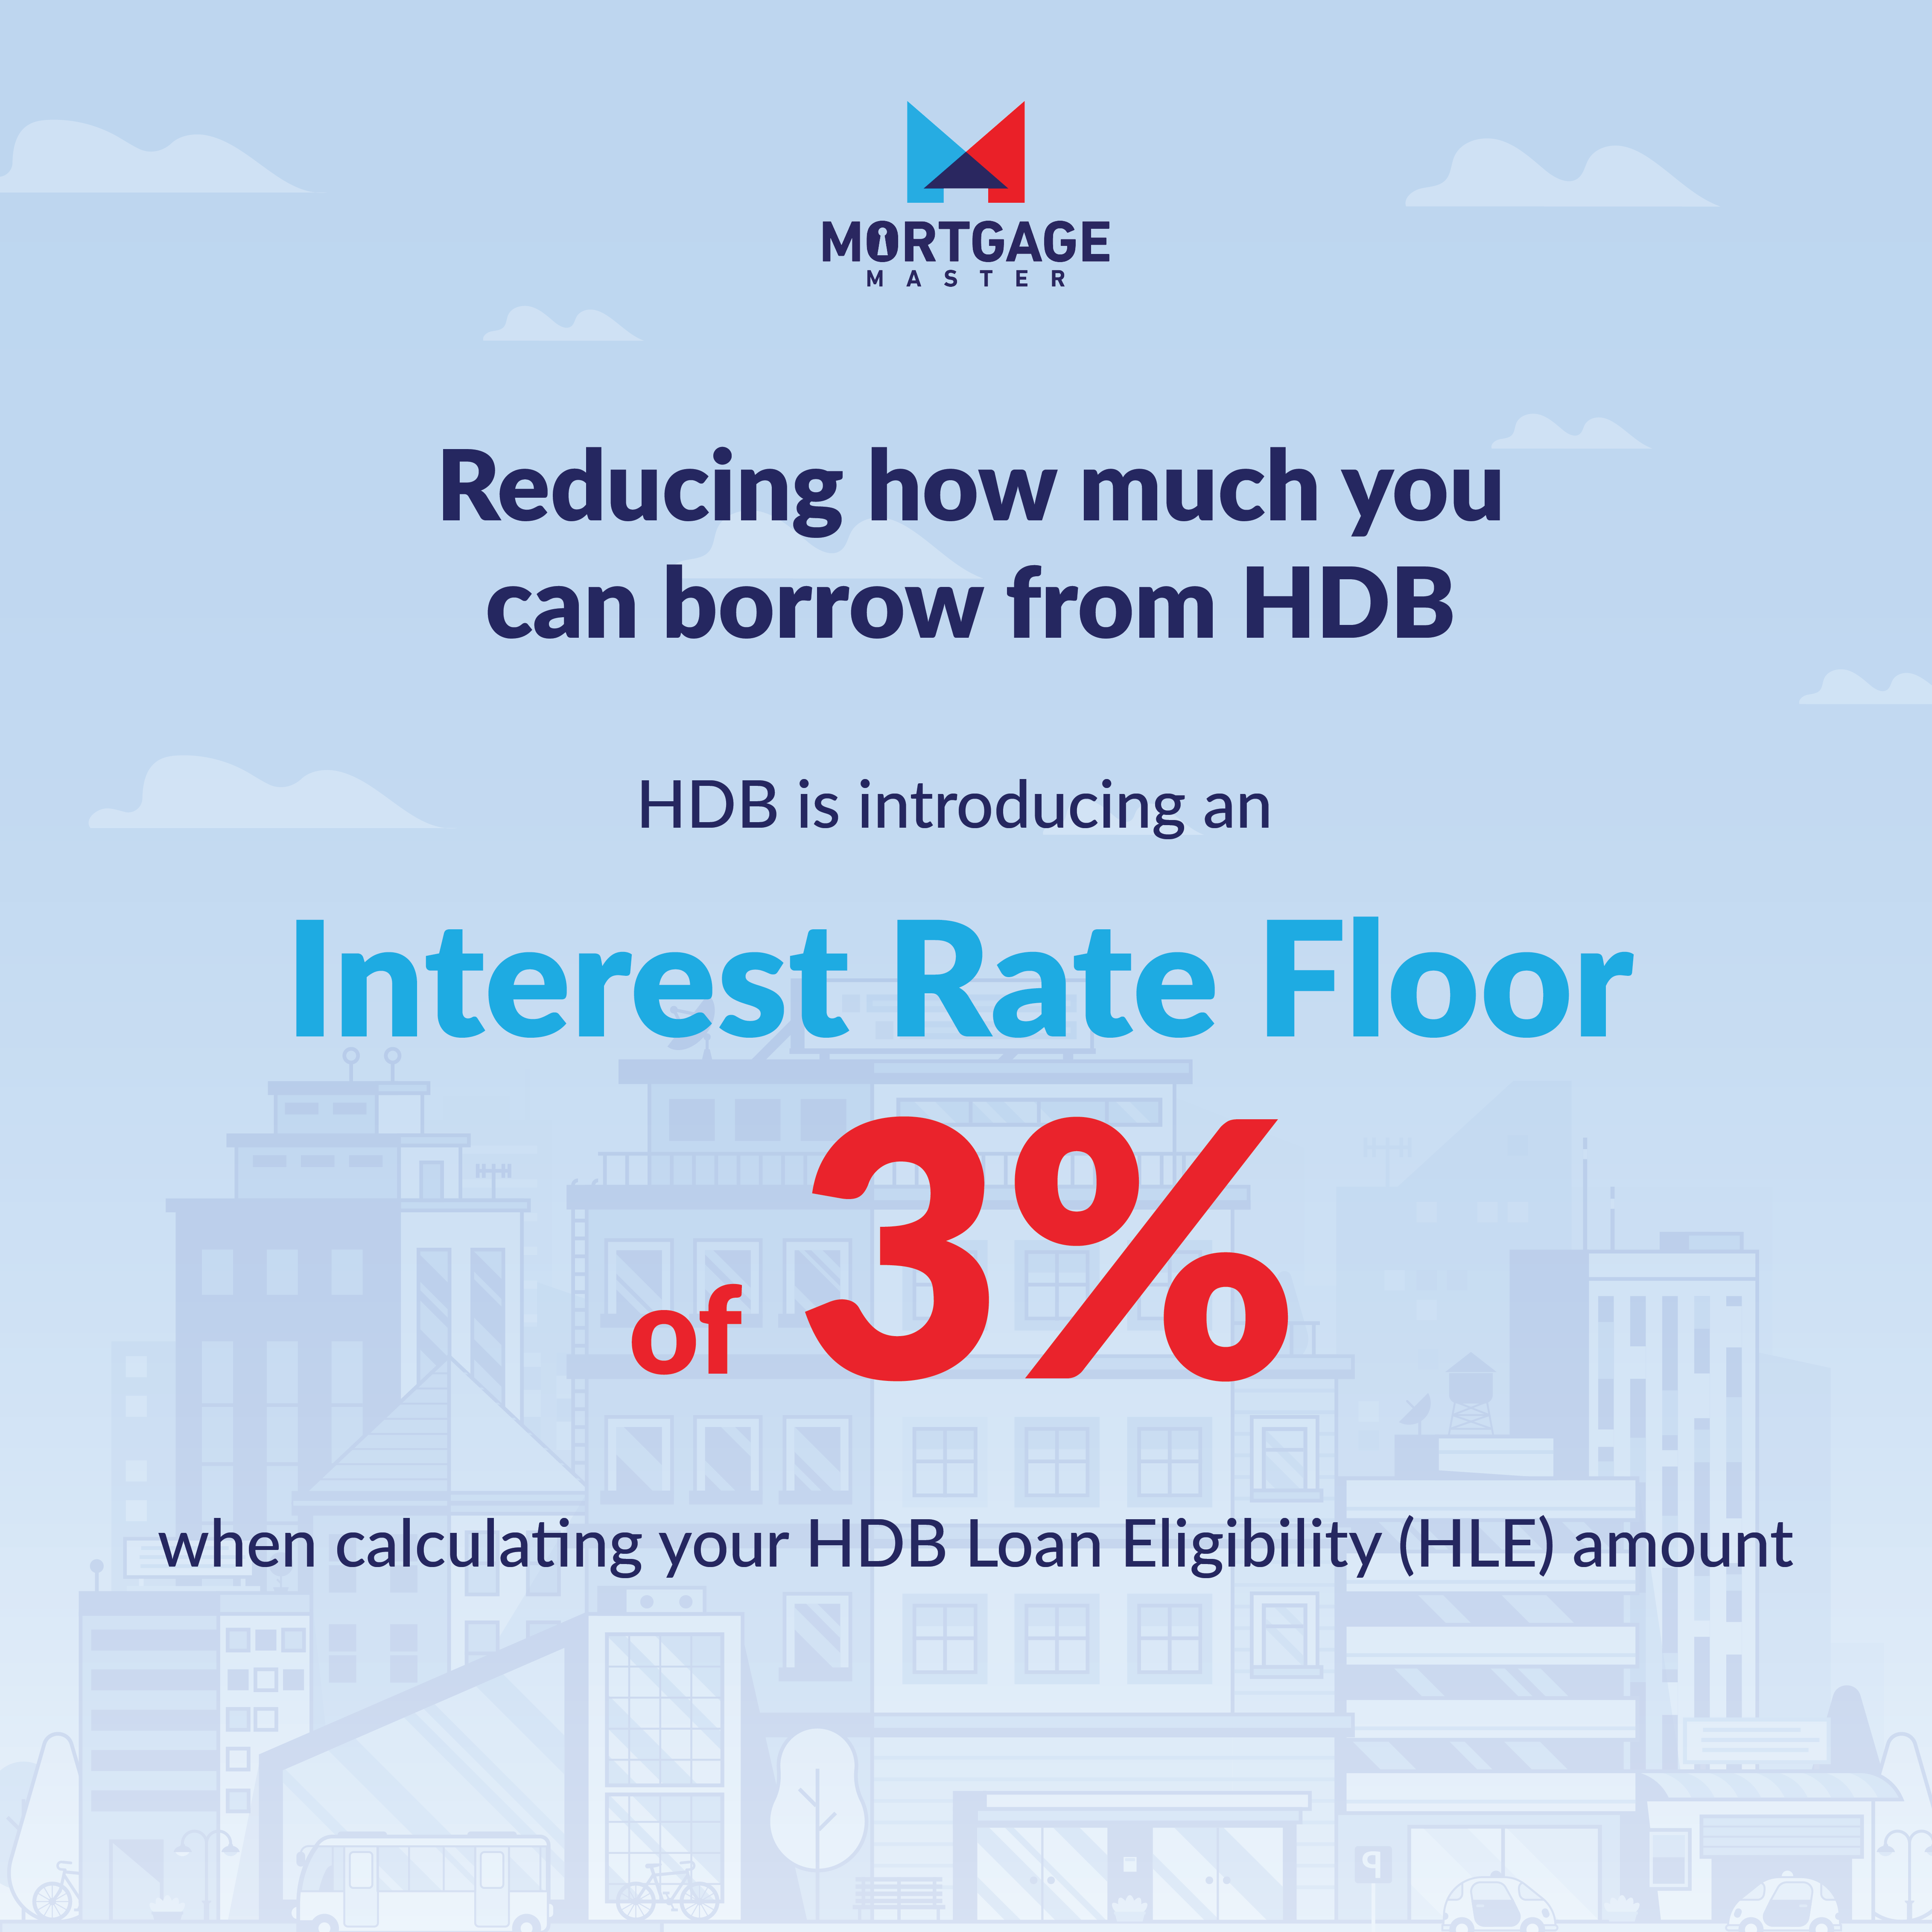 New HLE Interest Rate Floor of 3%